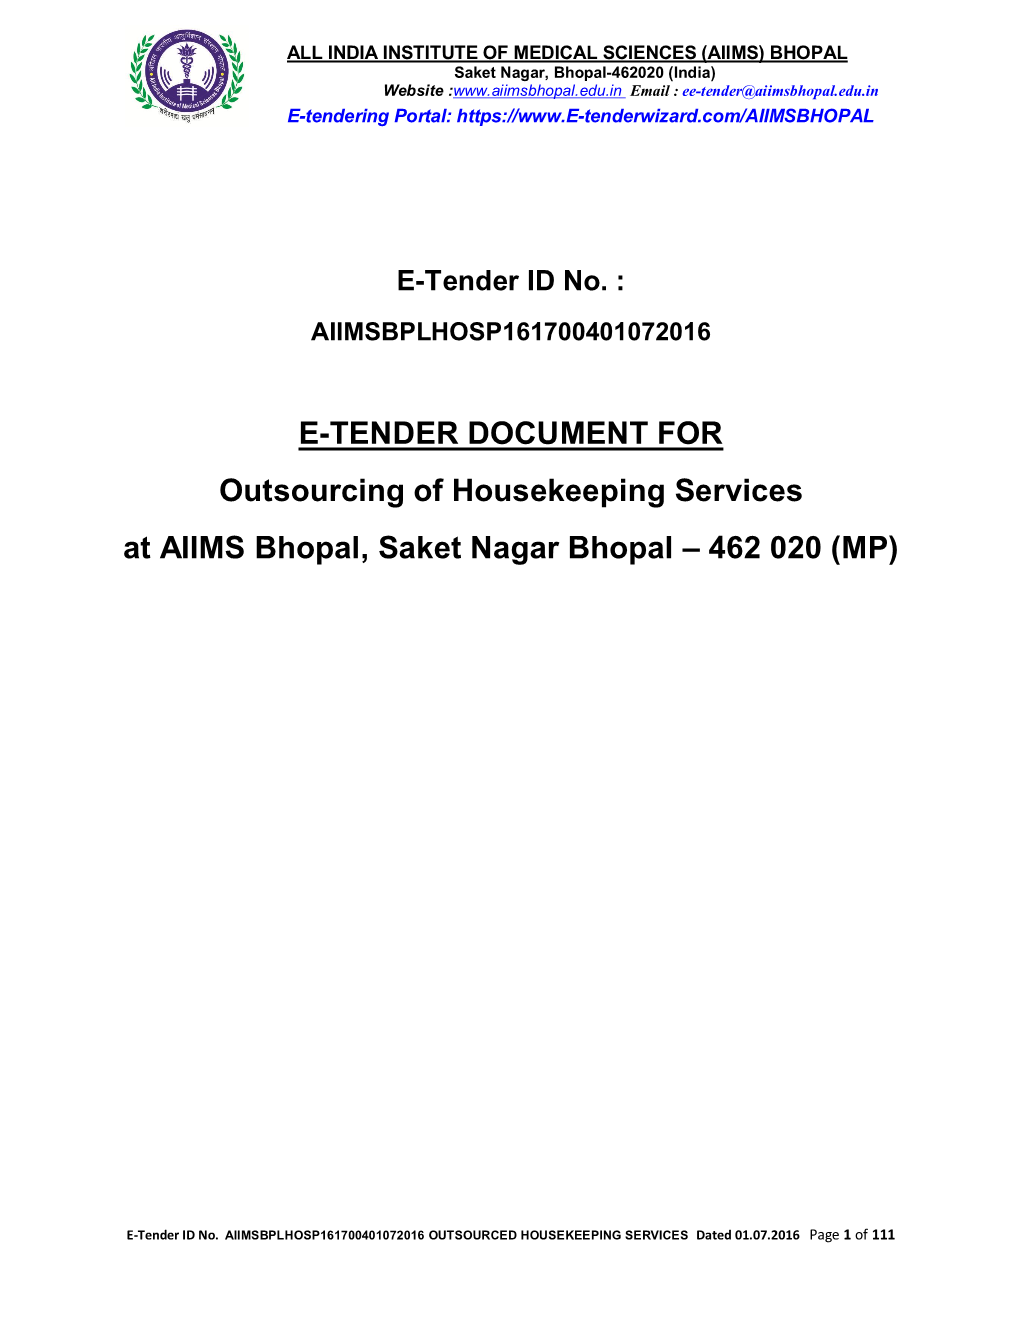 E-TENDER DOCUMENT for Outsourcing of Housekeeping Services at AIIMS Bhopal, Saket Nagar Bhopal – 462 020 (MP)